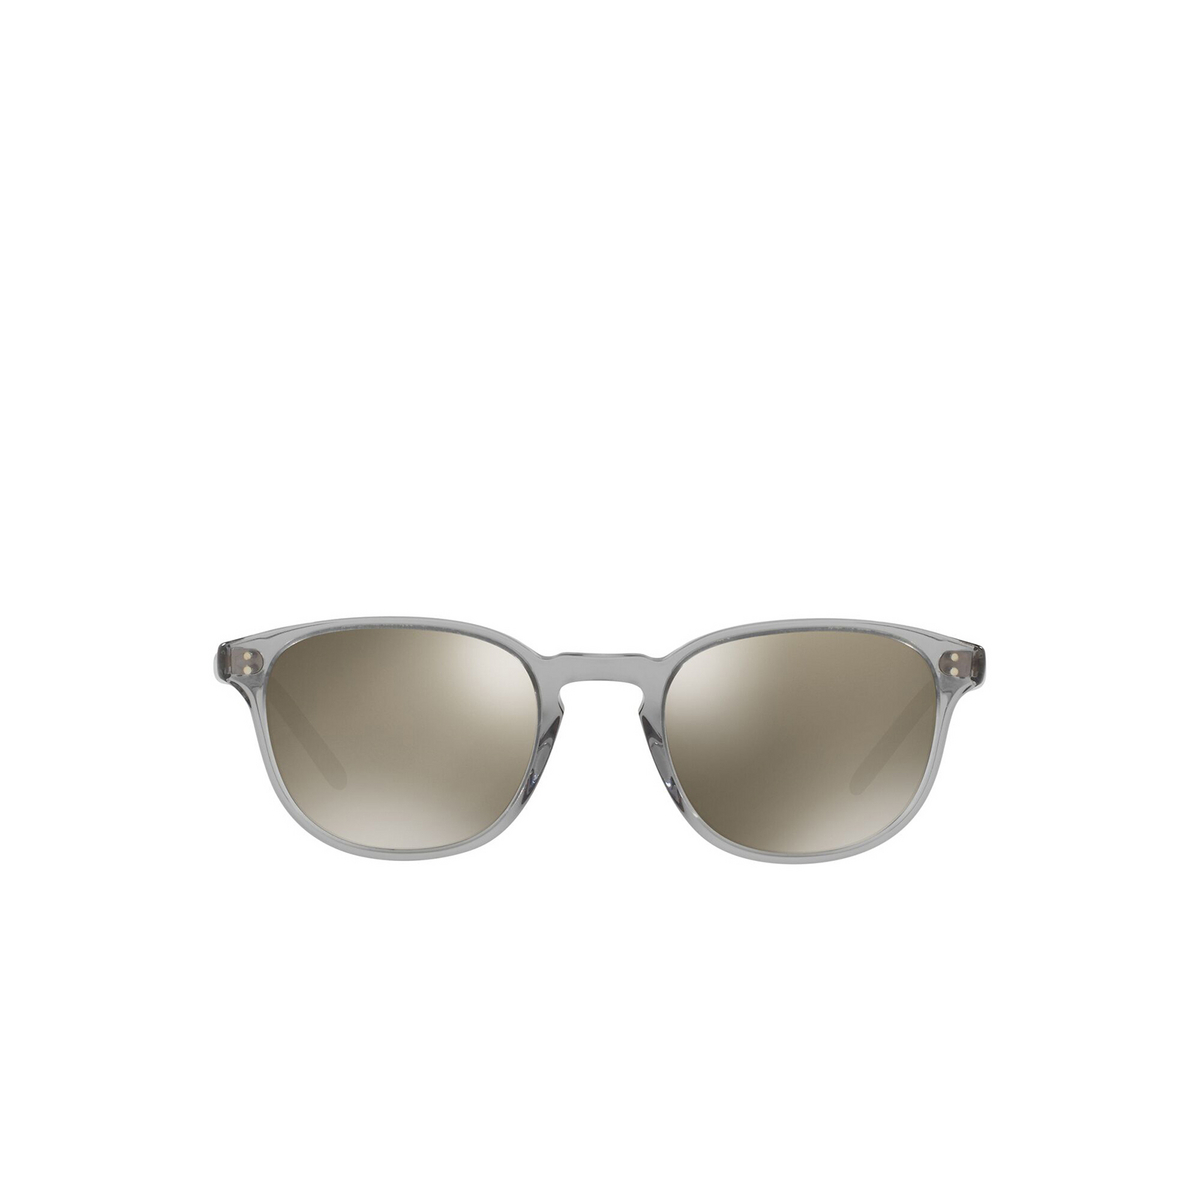 Oliver Peoples FAIRMONT Sunglasses 113239 Workman Grey - front view